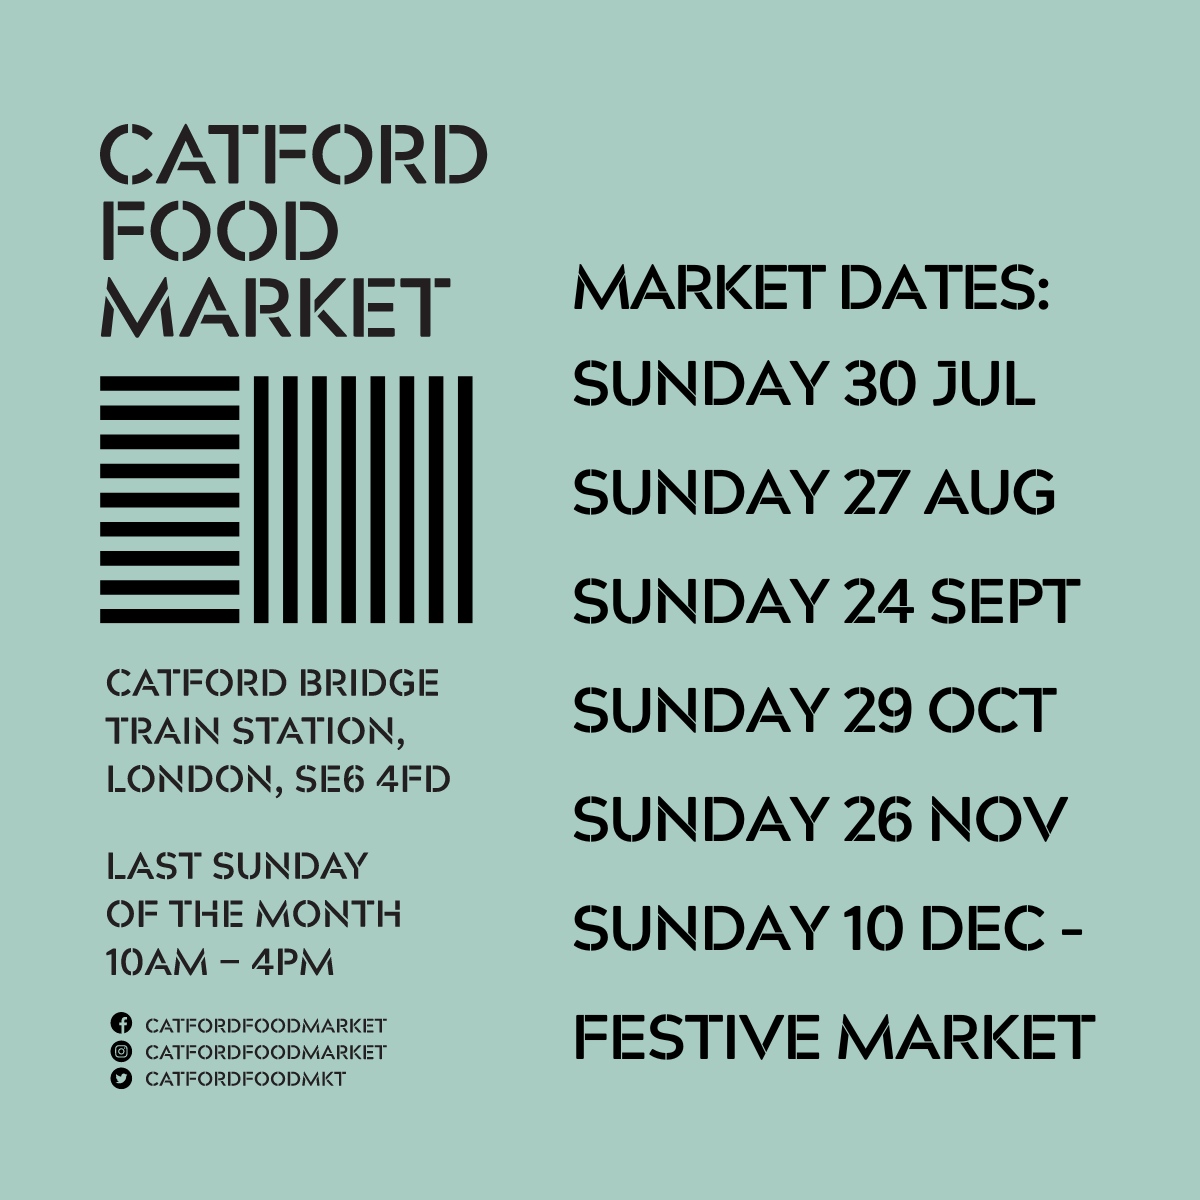 Mark your calendars and unleash your culinary cravings! 🗓️ Save the date for a gastronomic journey at Catford Food Market for the rest of the year. Get ready to savour delectable delights, meet local vendors, and taste the flavours of Catford! We'll see you on July 30th! 🤩